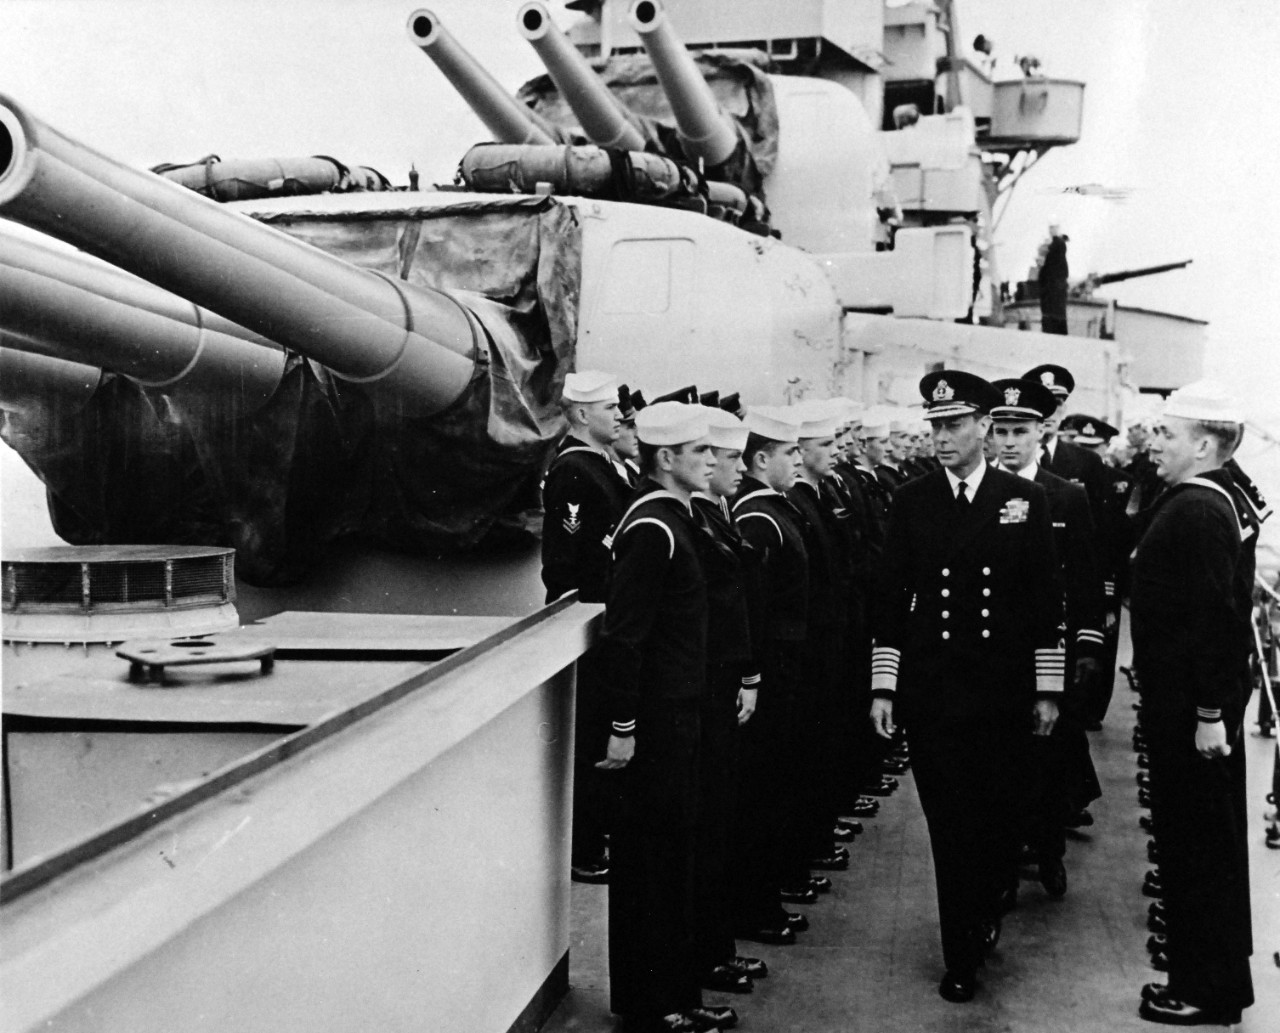 80-G-45710:   Normandy Invasion, June 1944.   King George VI of Great Britian visits U.S. Navy fighting ships at an English base.  U.S. Navy bluejackets stand rigidly at attention.  Photograph released on 10 June 1944.   Official U.S. Navy Photograph, now in the collections of the National Archives.  (2014/9/9).  